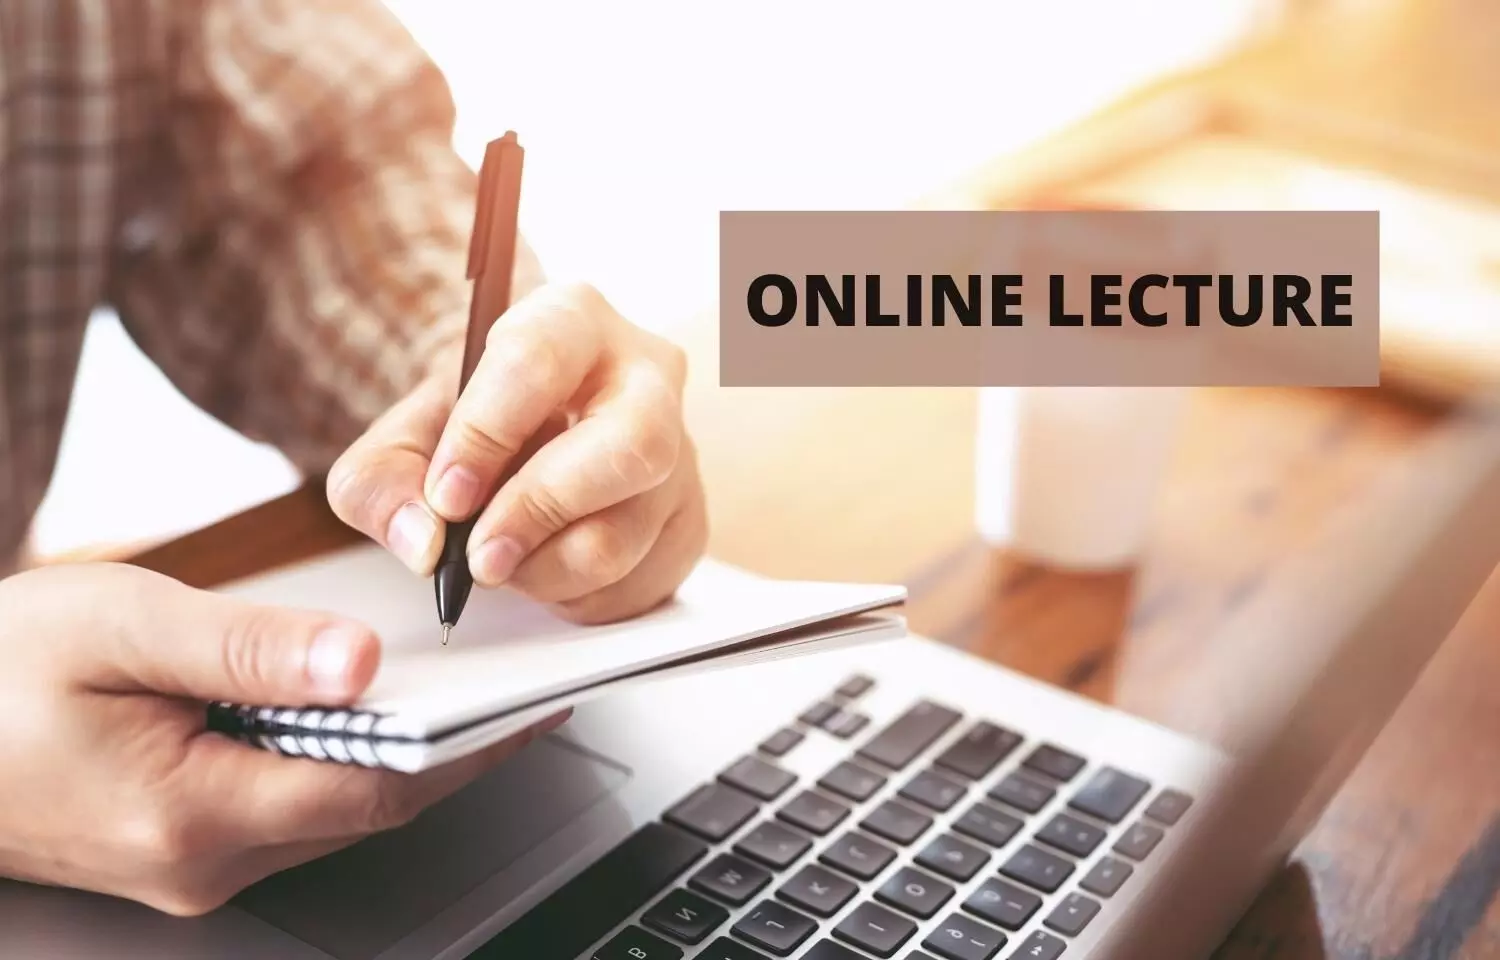 CPS Mumbai releases Schedule of Online Lecture Series for DMRE Part - II course, Details